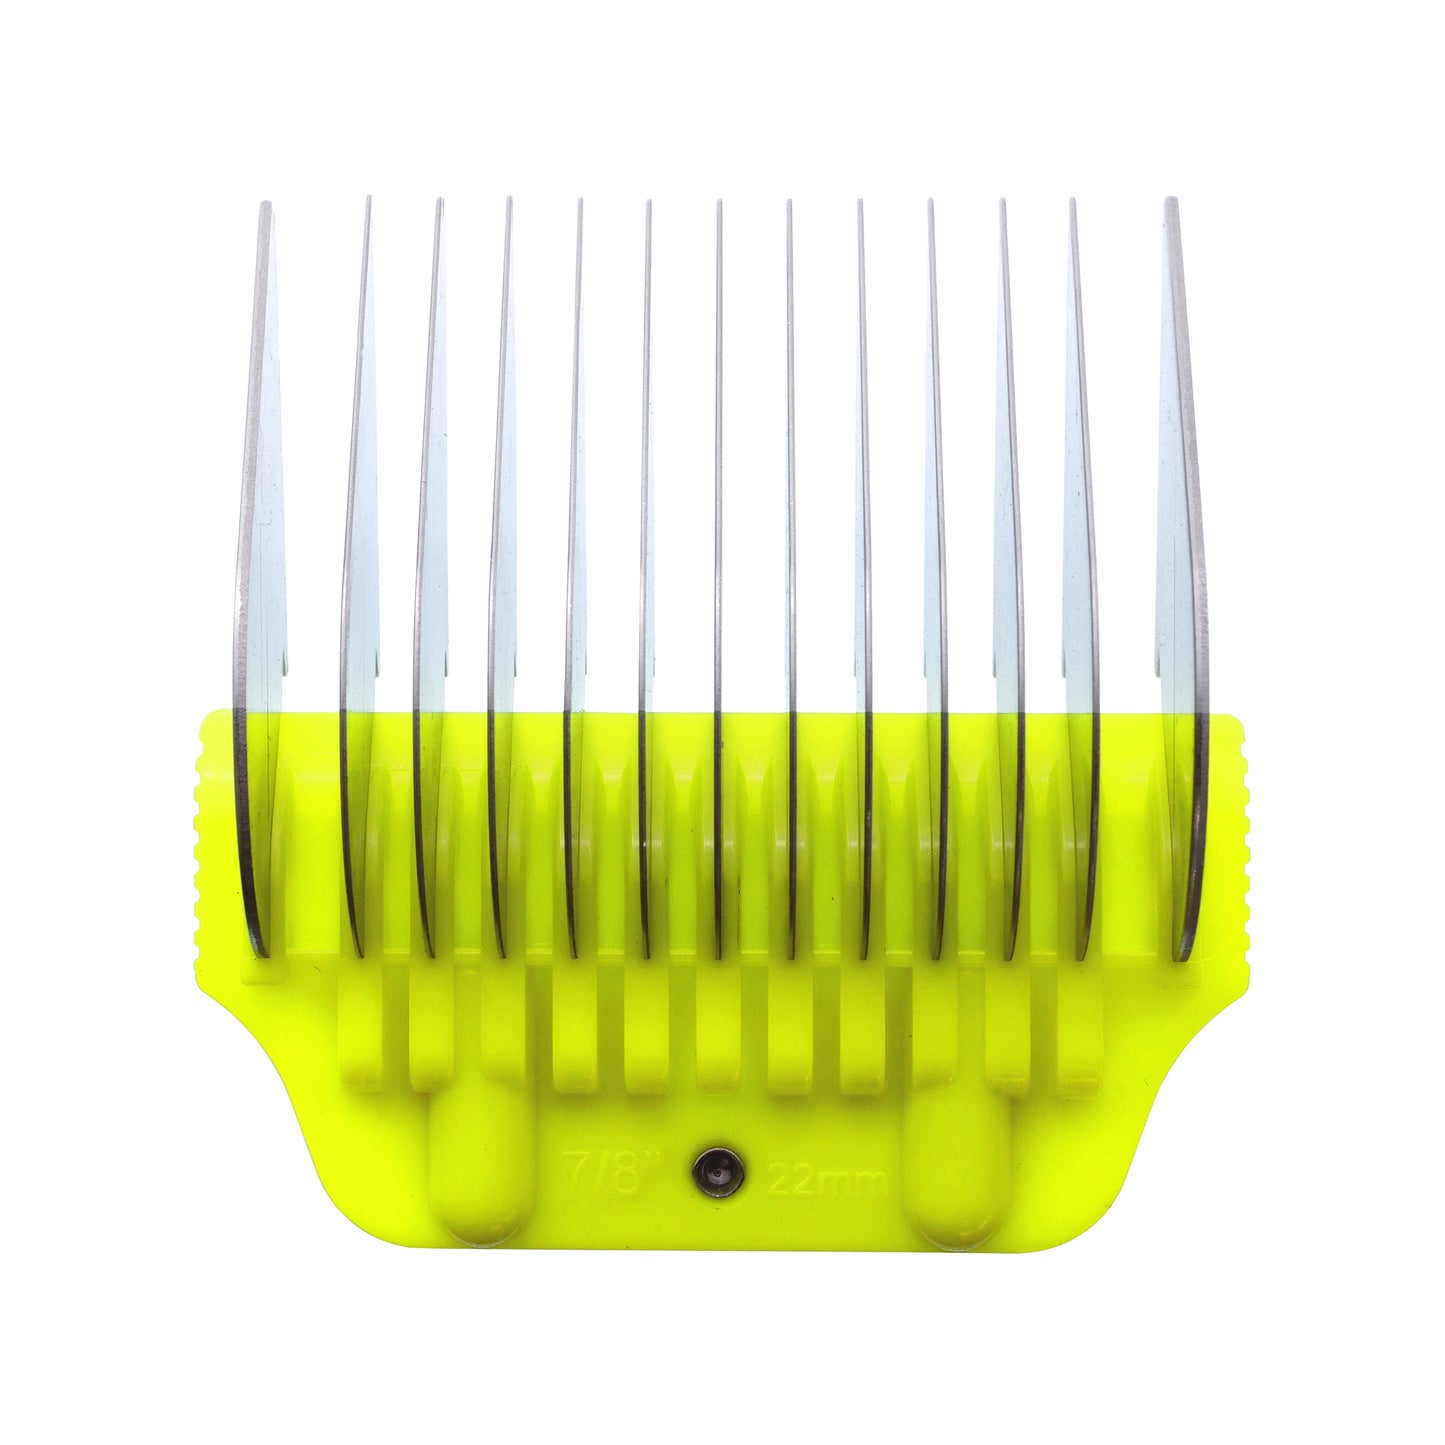 The Artero Wide Snap-On Metal Comb 22mm - 7/8" is designed for use with the Artero A5 wide clipper blade and offers a smooth, even finish. This comb is also compatible with Andis, Moser, Heiniger, Oster, and Aesculap Fav5 and Fav5 CL blades. Features: Cutting height: 7/8" Metal Construction Fits A5 Clippers.